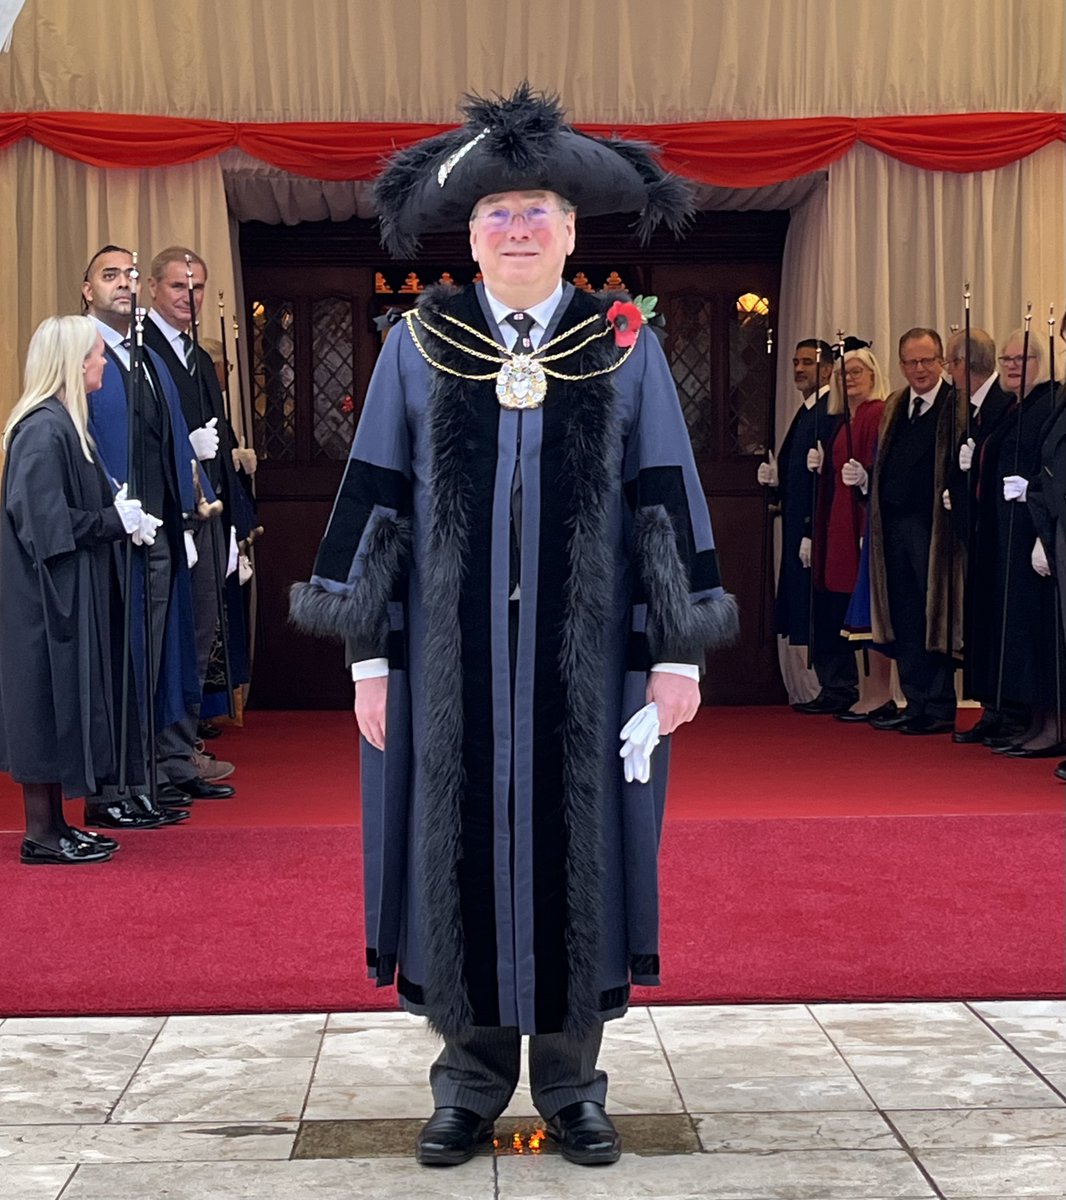 The Seattle-born economist, accountant, and scientist Michael Mainelli has taken office today as the 695th Lord Mayor of the City of London. During his mayoralty, the Lord Mayor will act as an international spokesperson for the City.